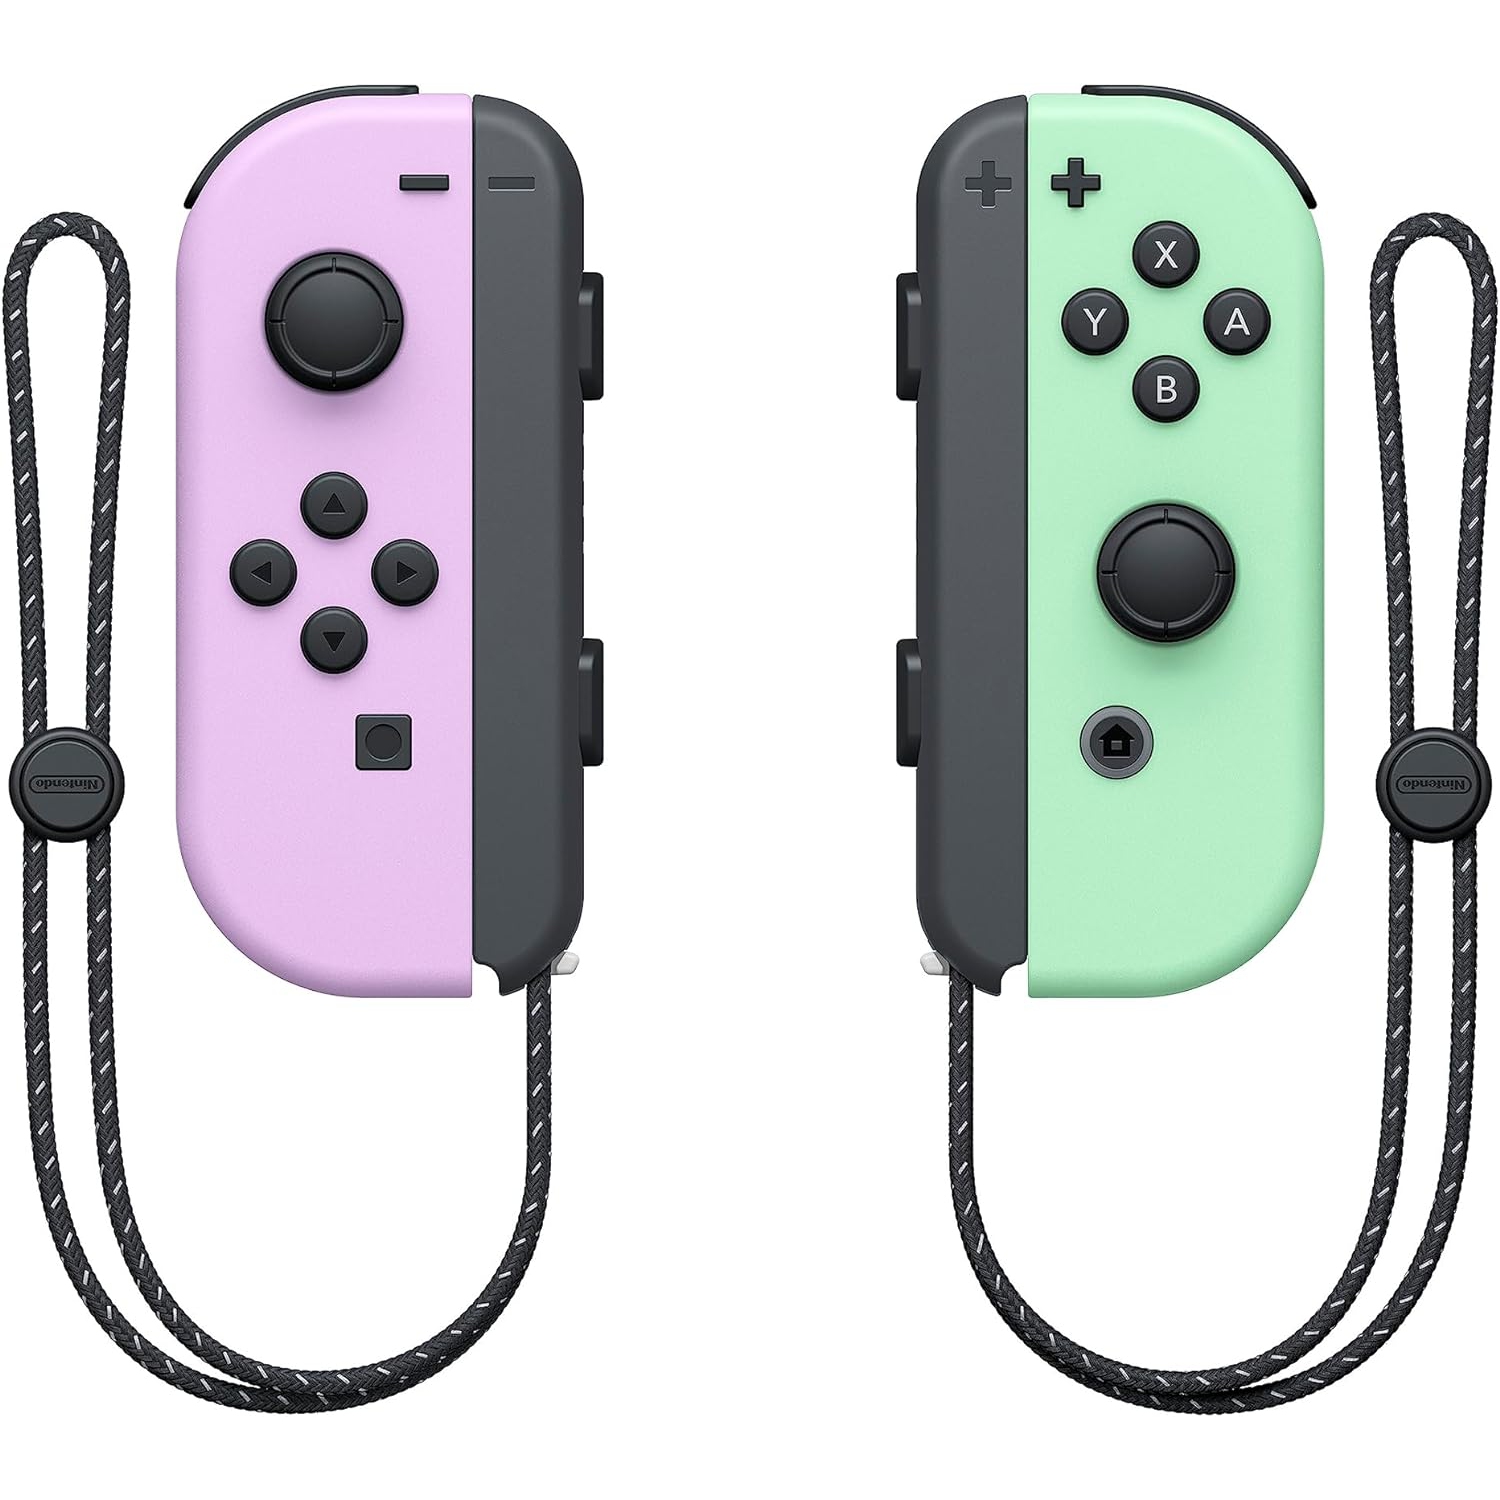 Refurbished (Good) Nintendo Switch Original Left and Right Joy-Con Controllers - Pastel Purple / Pastel Green